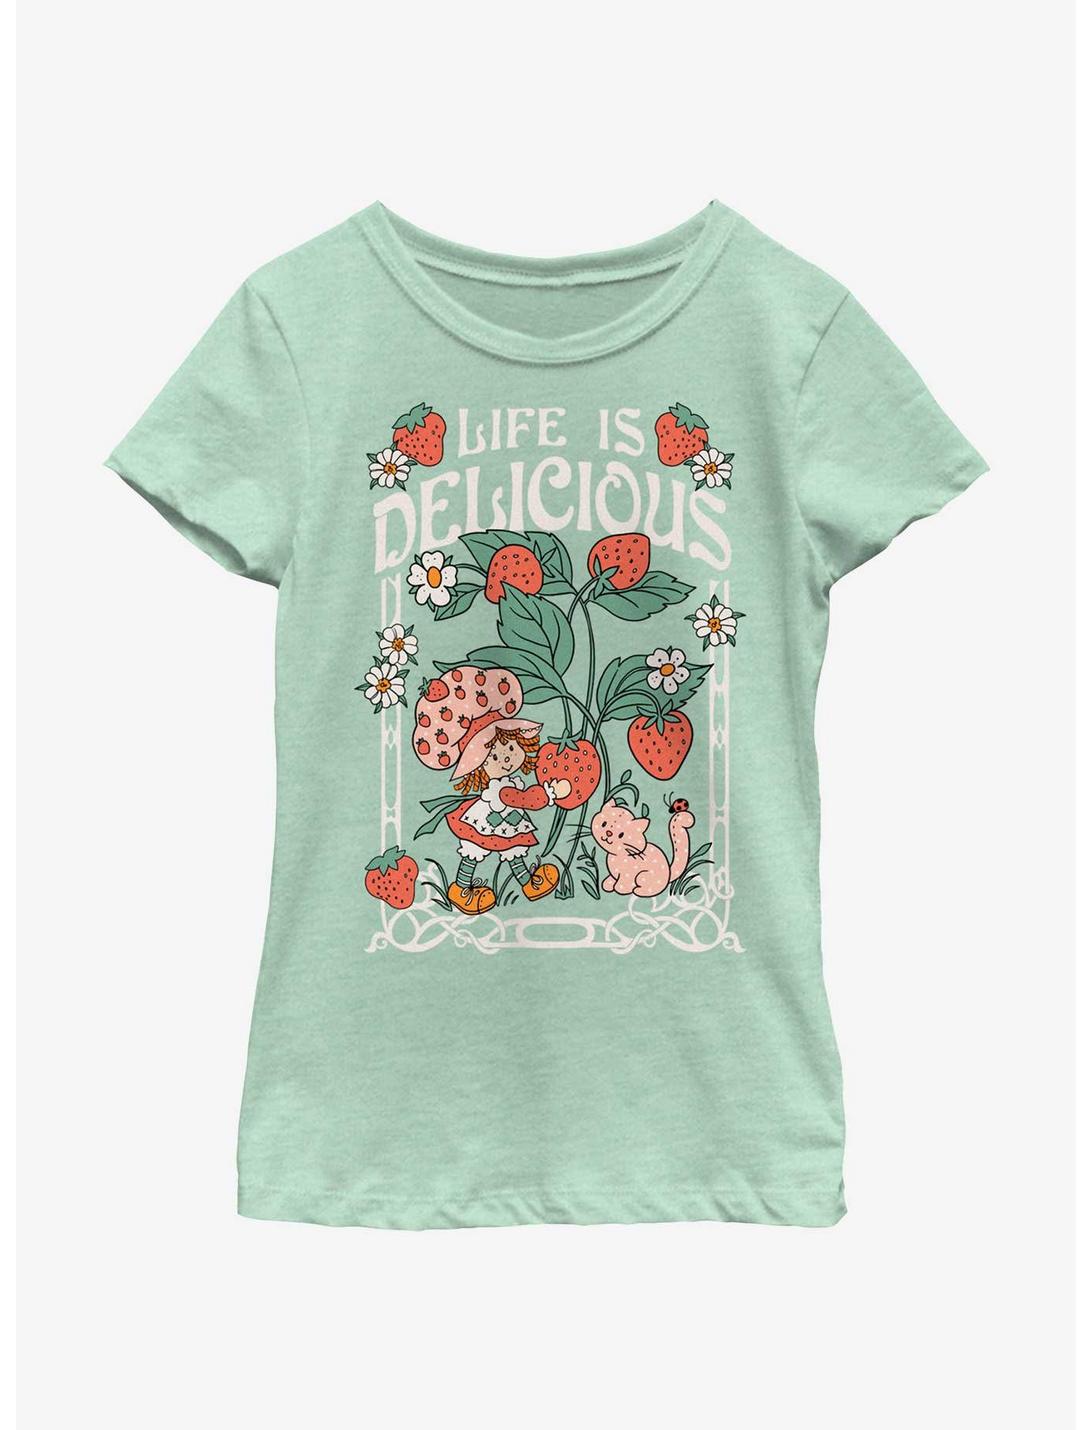 Strawberry Shortcake Life Is Delicious Youth Girls T-Shirt, MINT, hi-res